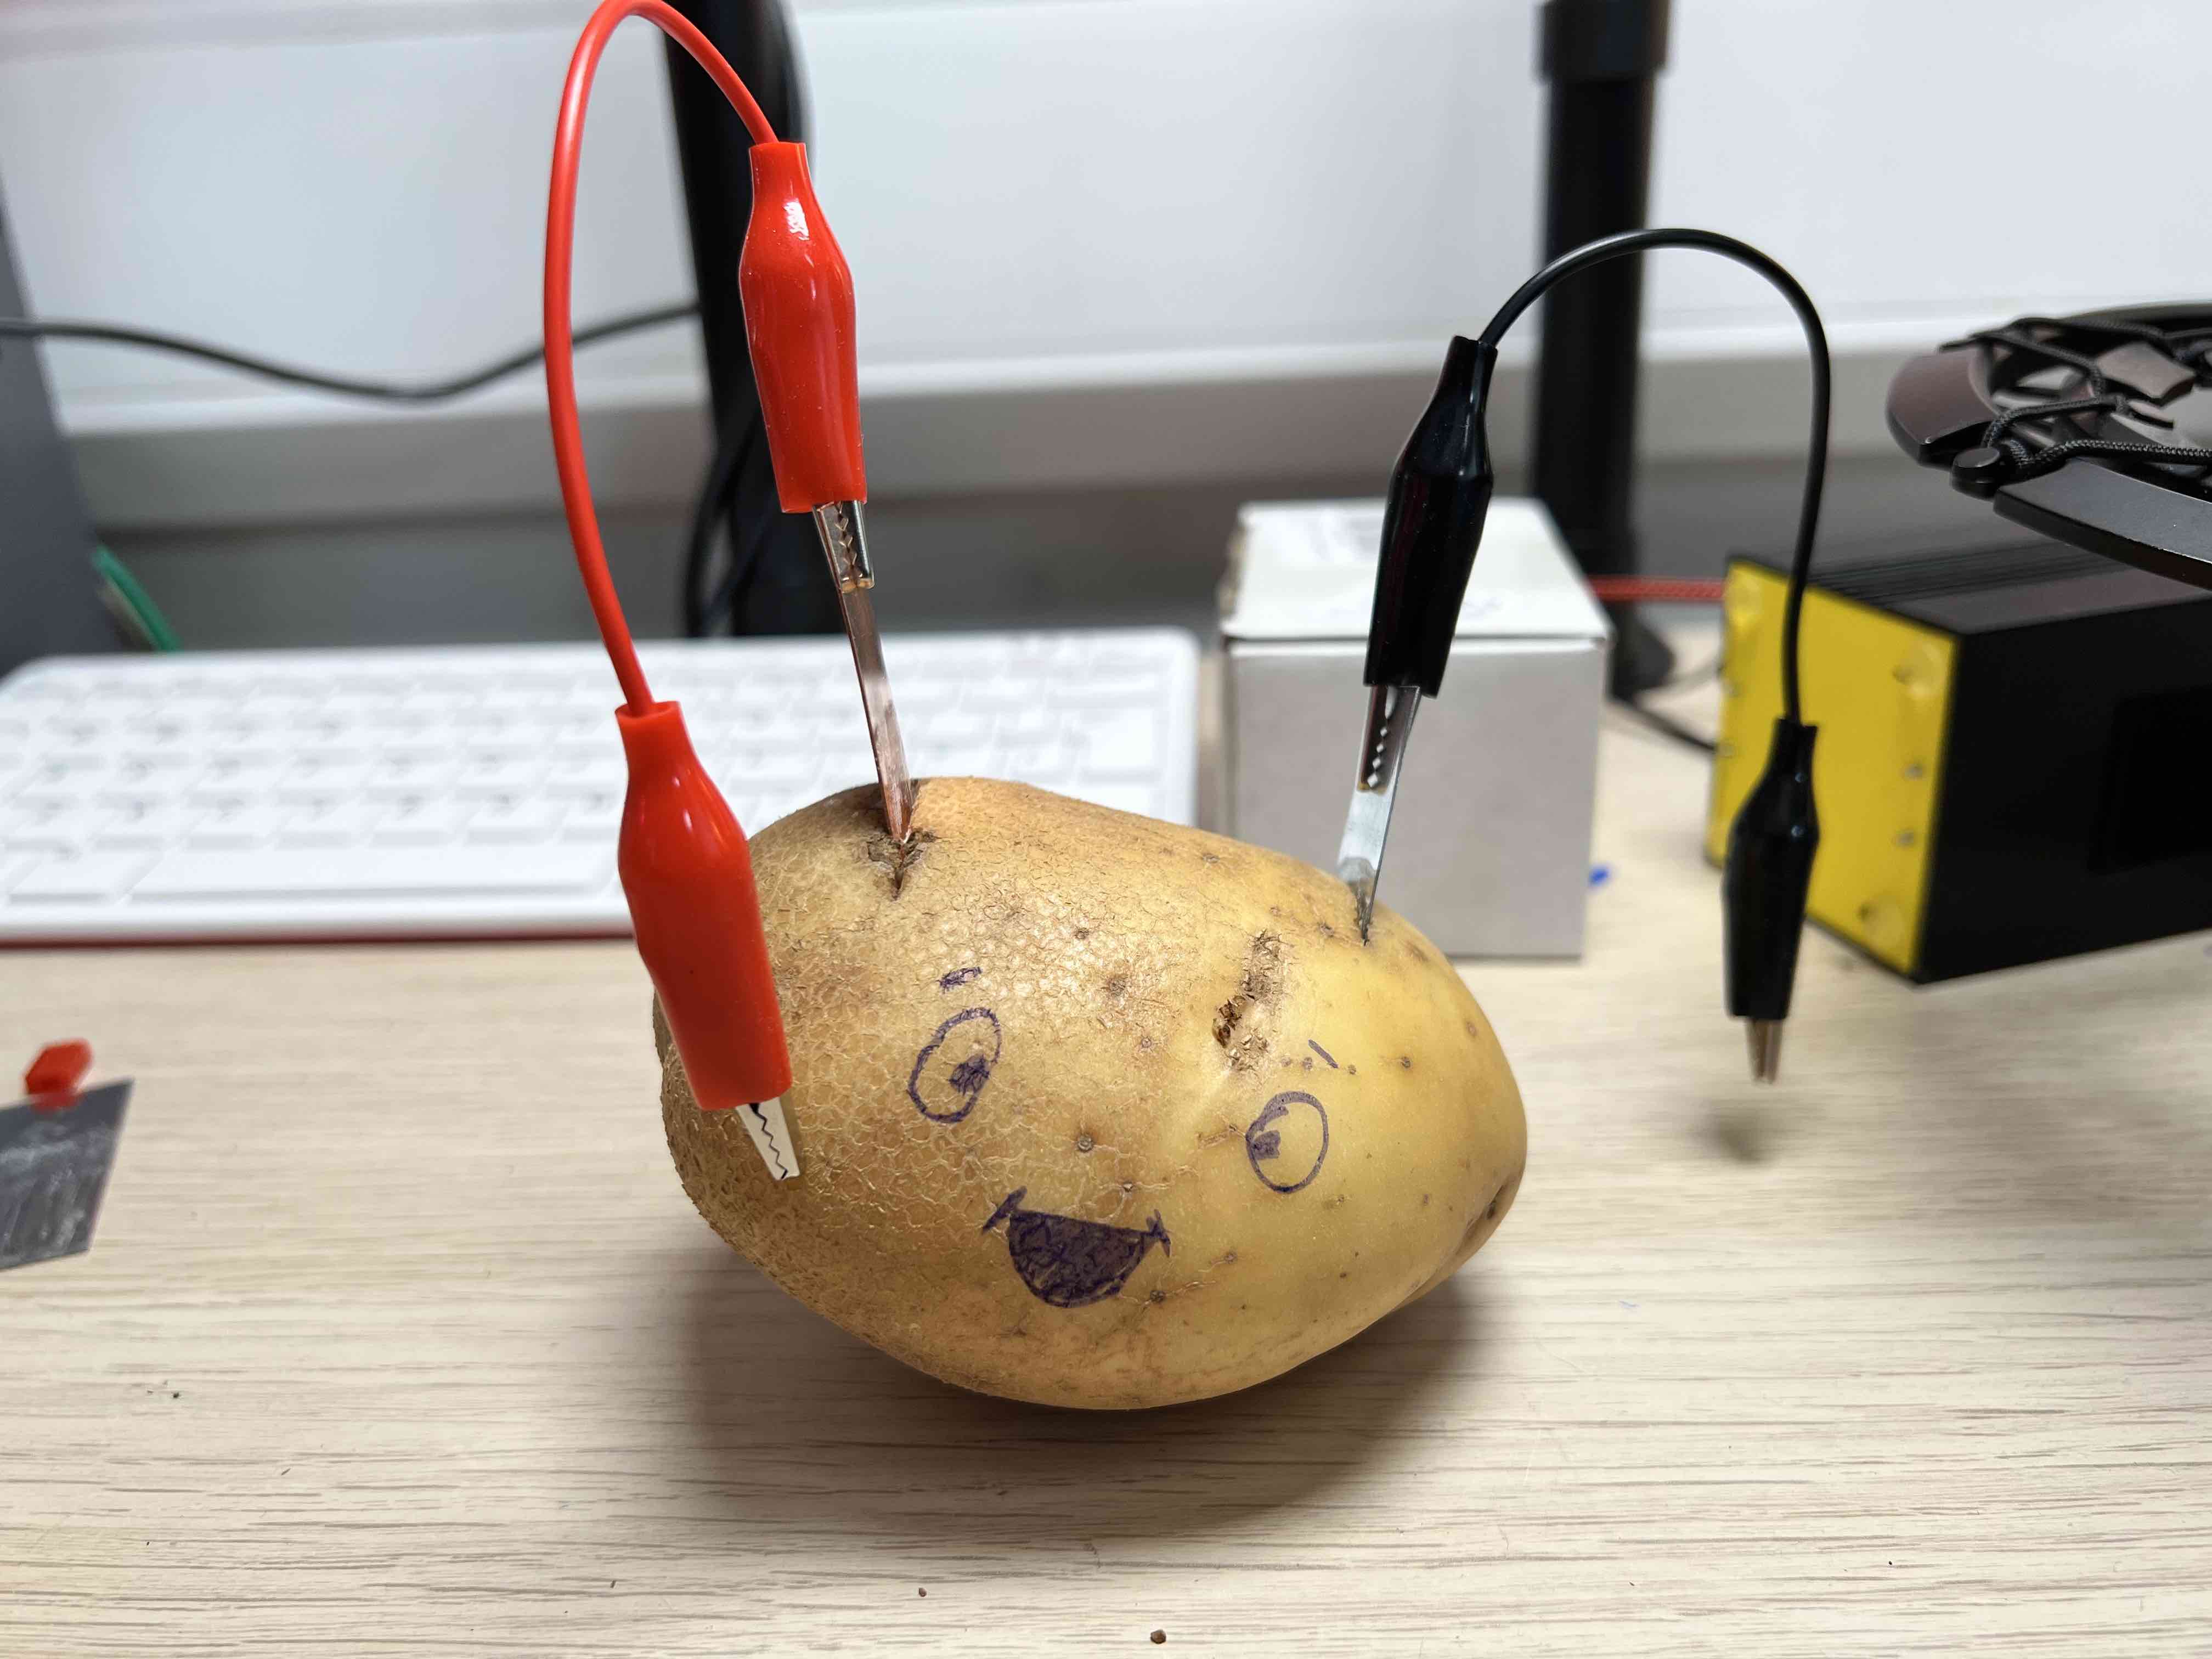 Potato wired up with 2 electrodes